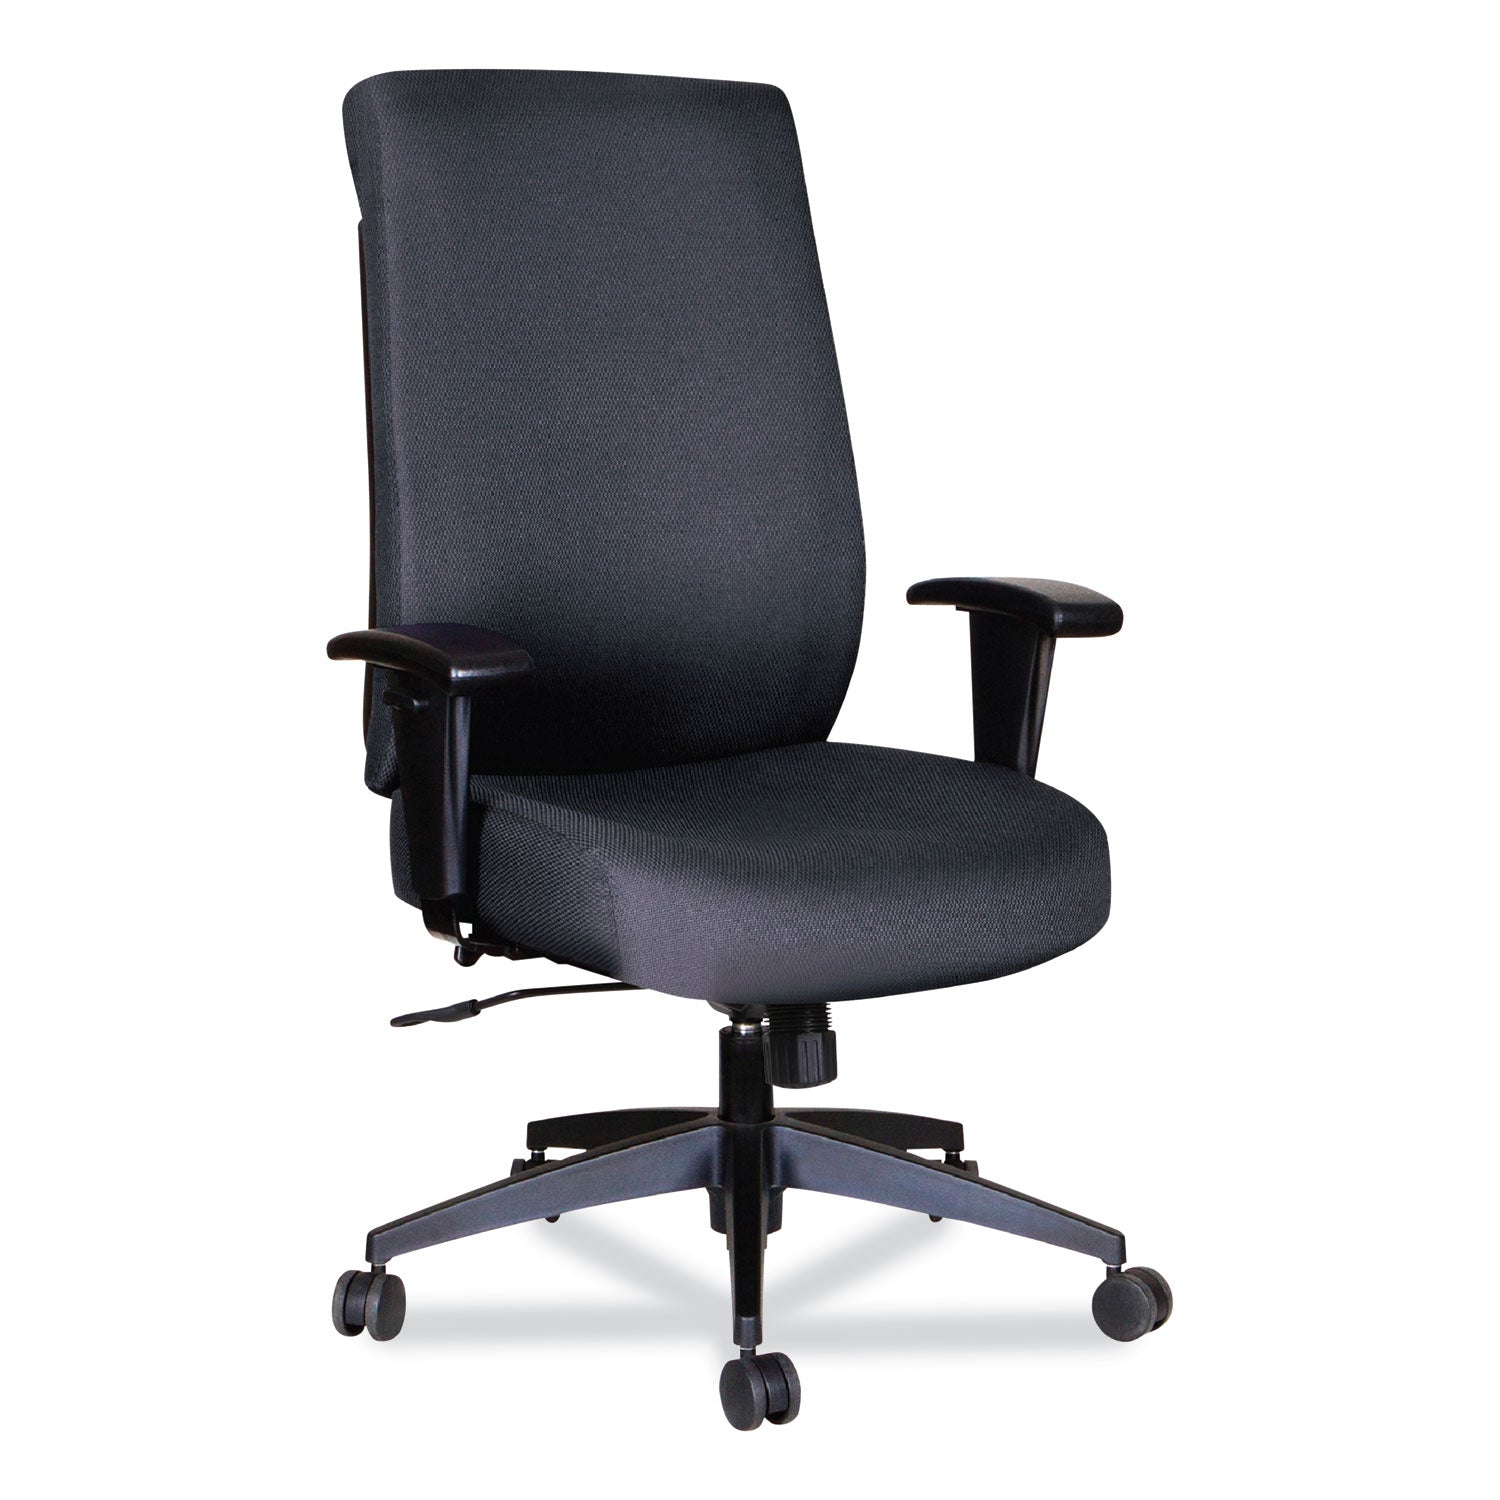 alera-wrigley-series-high-performance-high-back-synchro-tilt-task-chair-supports-275-lb-1724-to-2055-seat-height-black_alehps4101 - 1